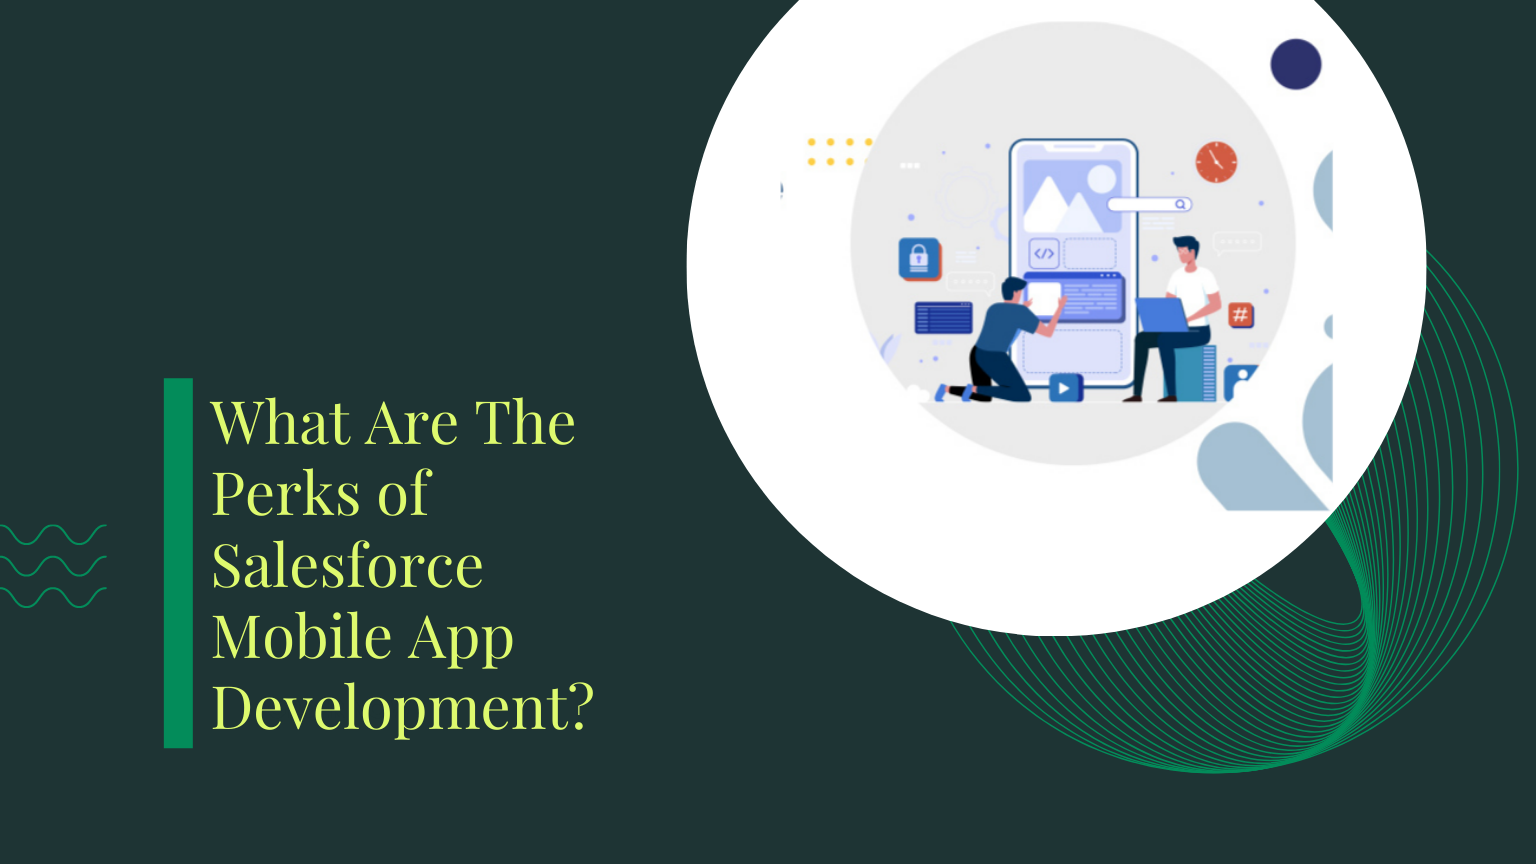 What Are The Perks of Salesforce Mobile App Development